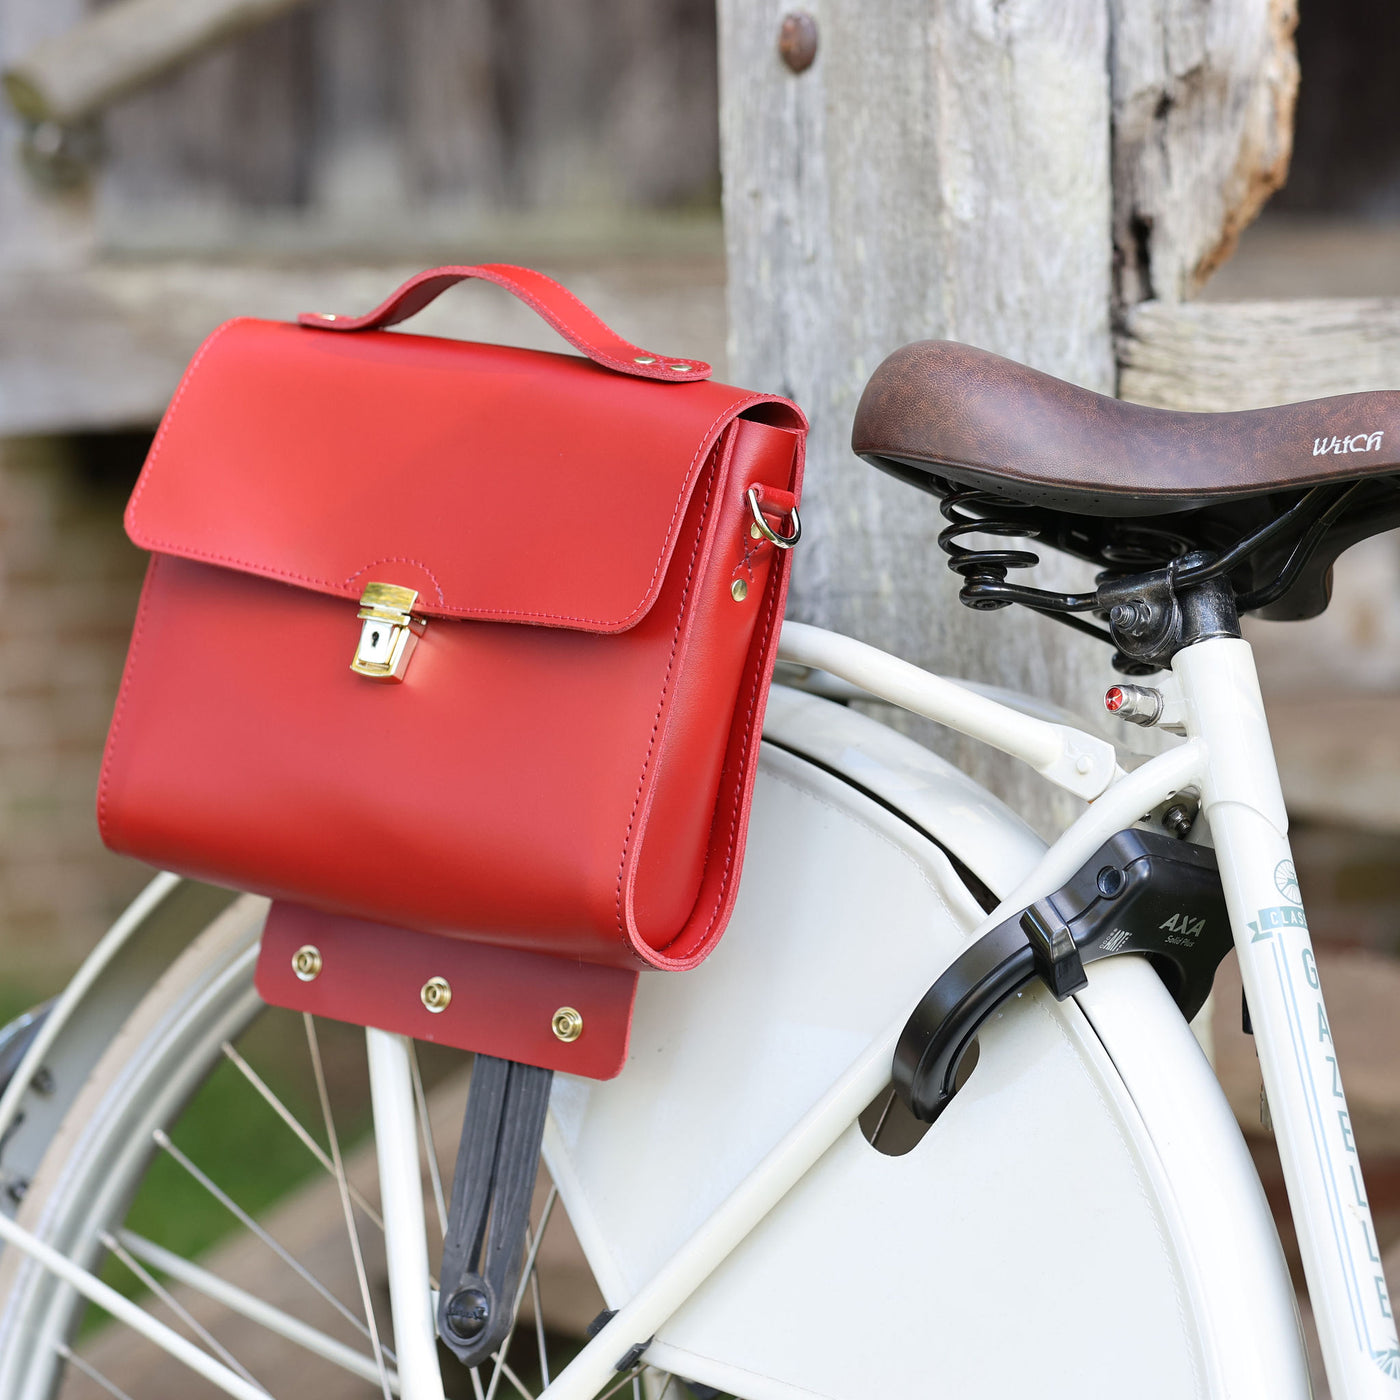 Picture of women's stylish bike bags in the  style of red, tan and aqua leather satchel bike bags